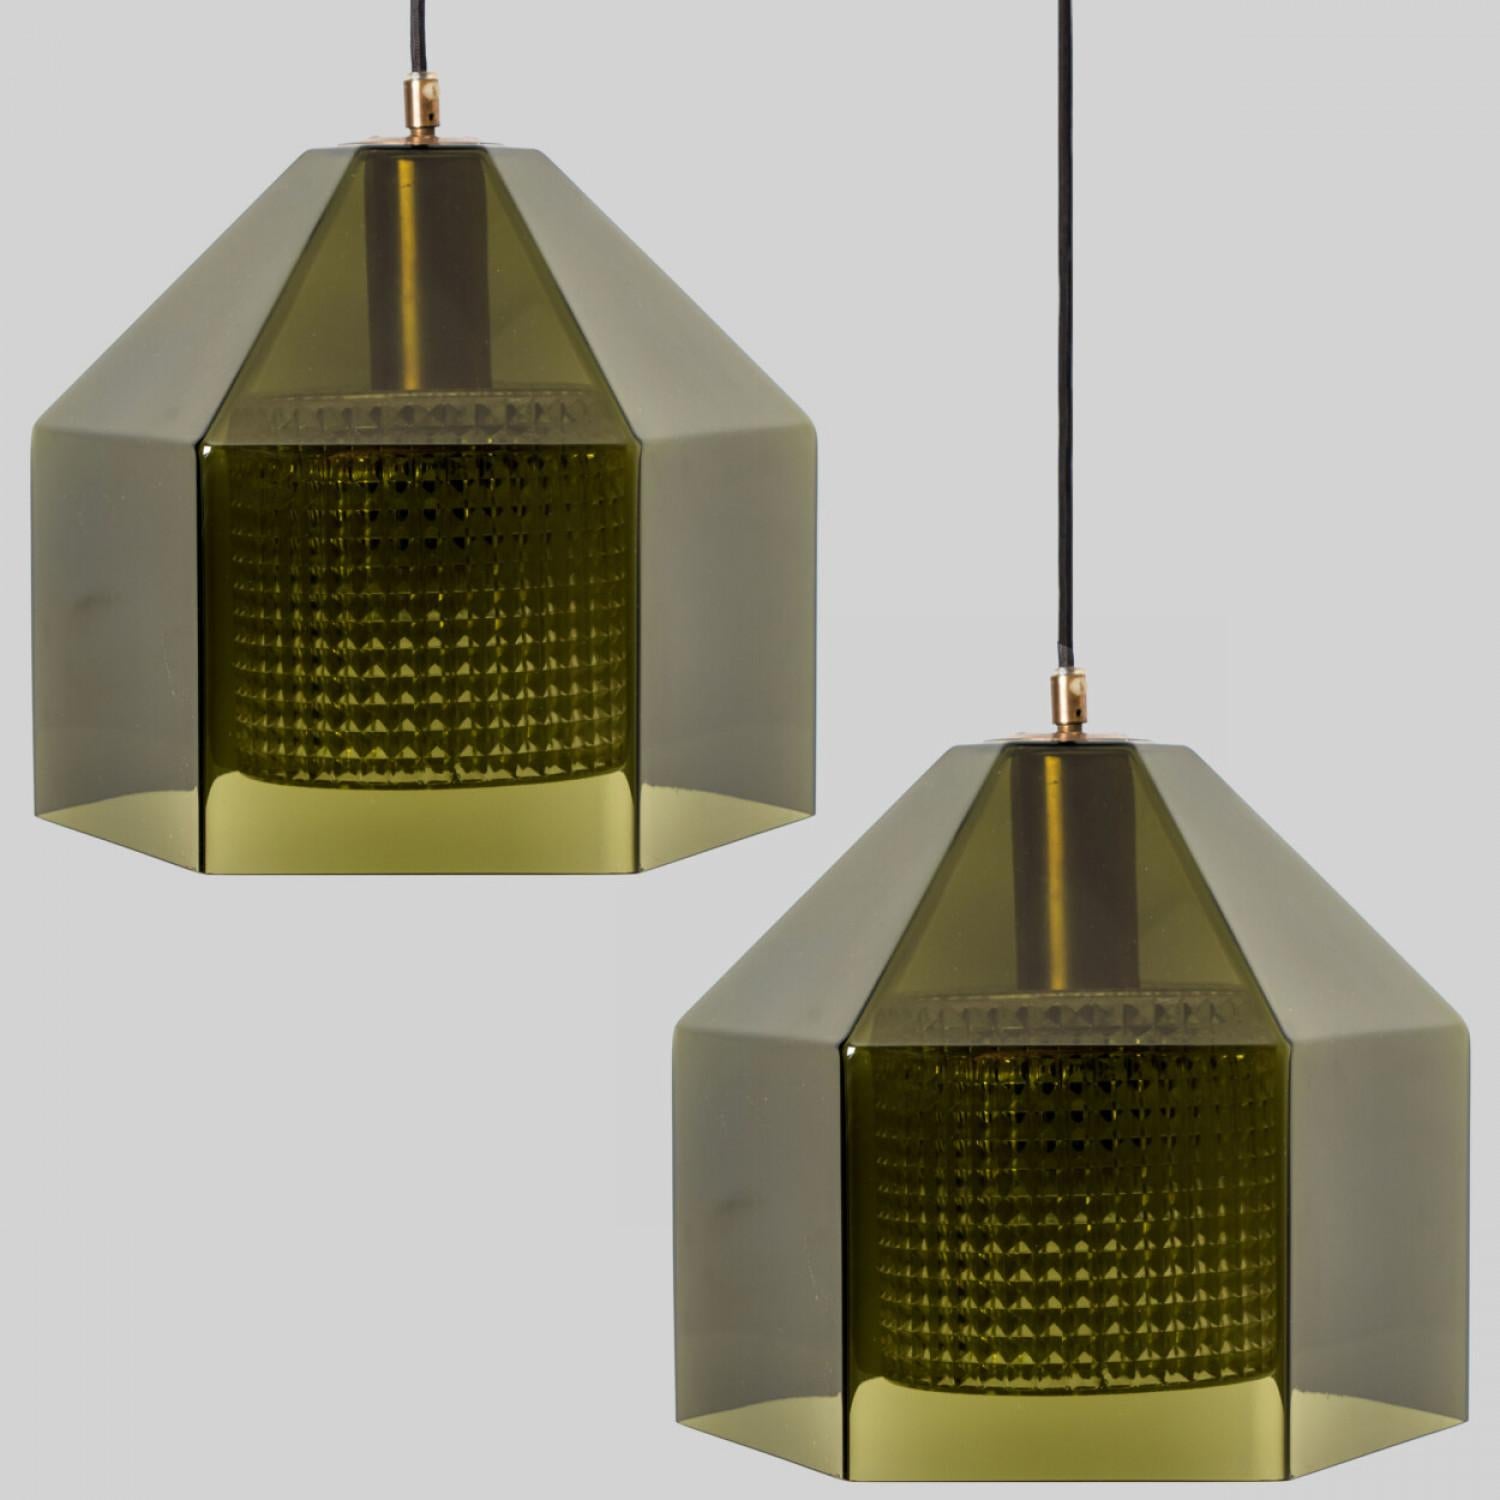 Elegant pendant lamp designed by Carl Fagerlund for Swedish glass company Orrefors, 1960s Sweden. Hexagon shaped with green tinted glass with an internal diffuser in clear pressed glass.
Polished brass fittings and